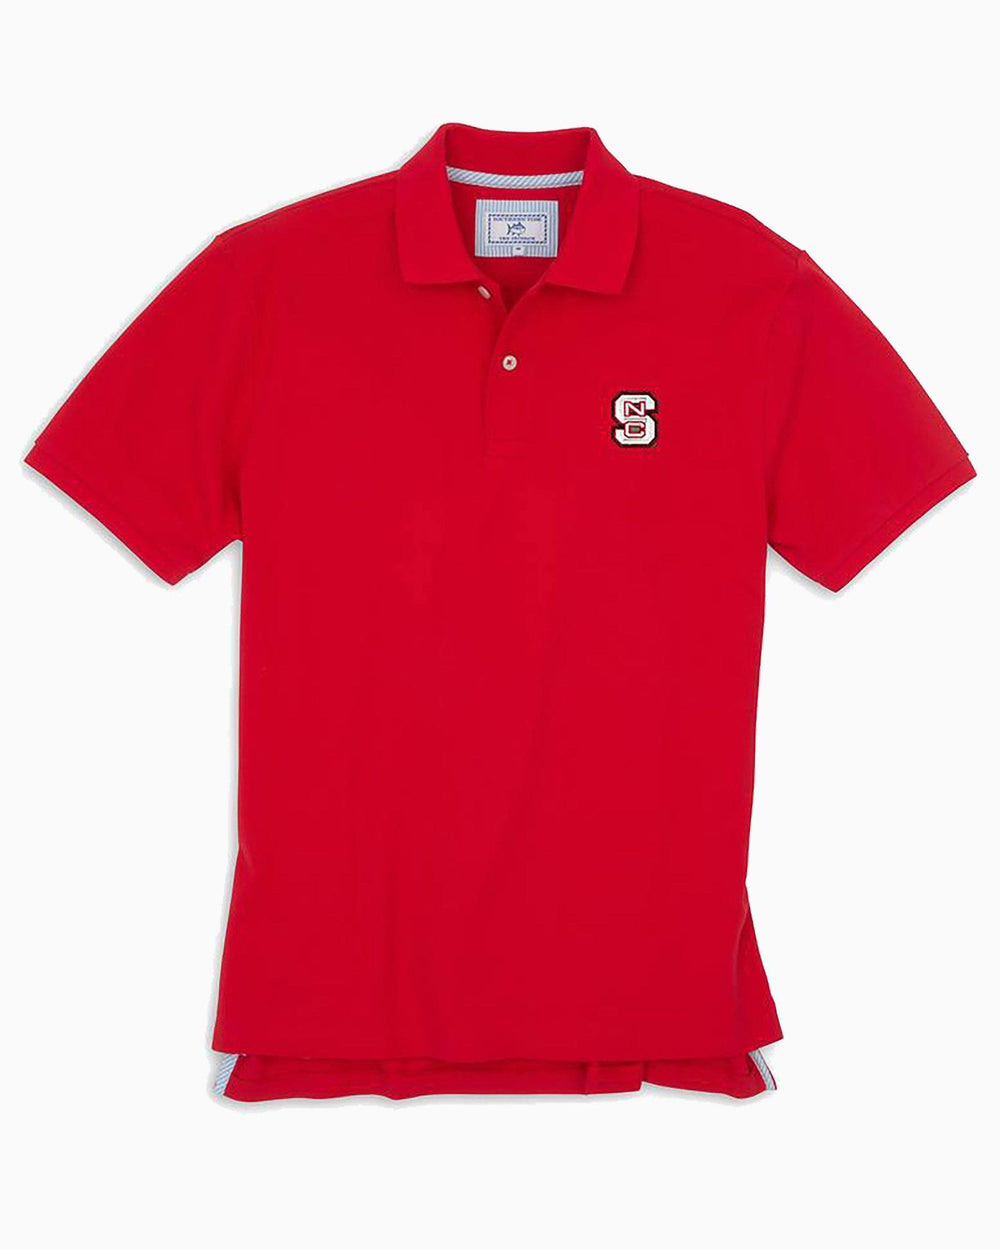 The front view of the Men's Red NC State Wolfpack Pique Polo Shirt by Southern Tide - Varsity Red